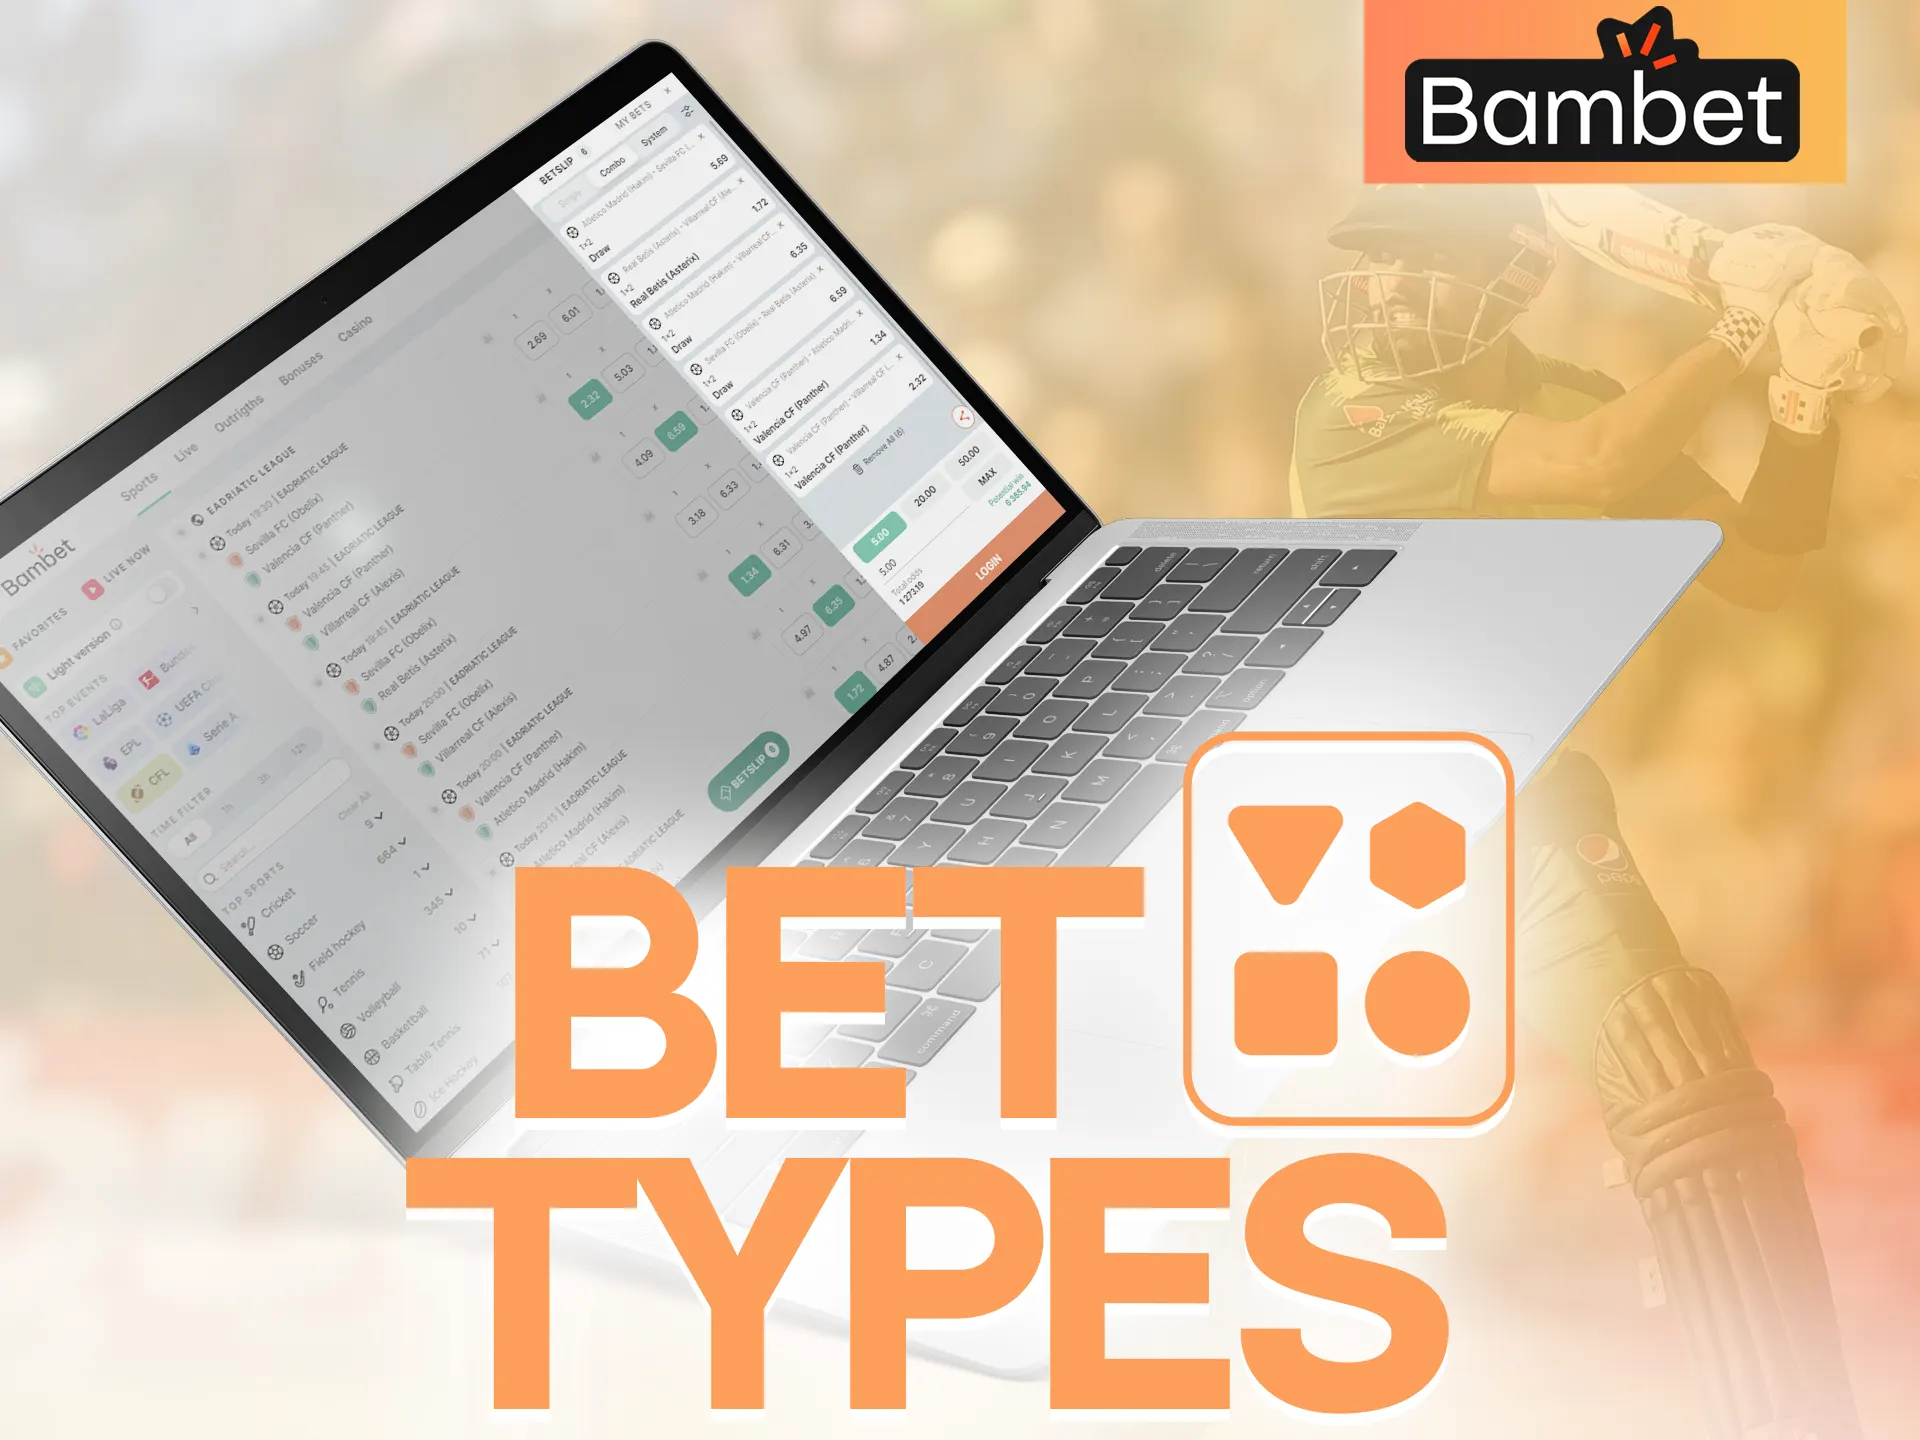 Different types of bets are available to you for sports betting with Bambet.